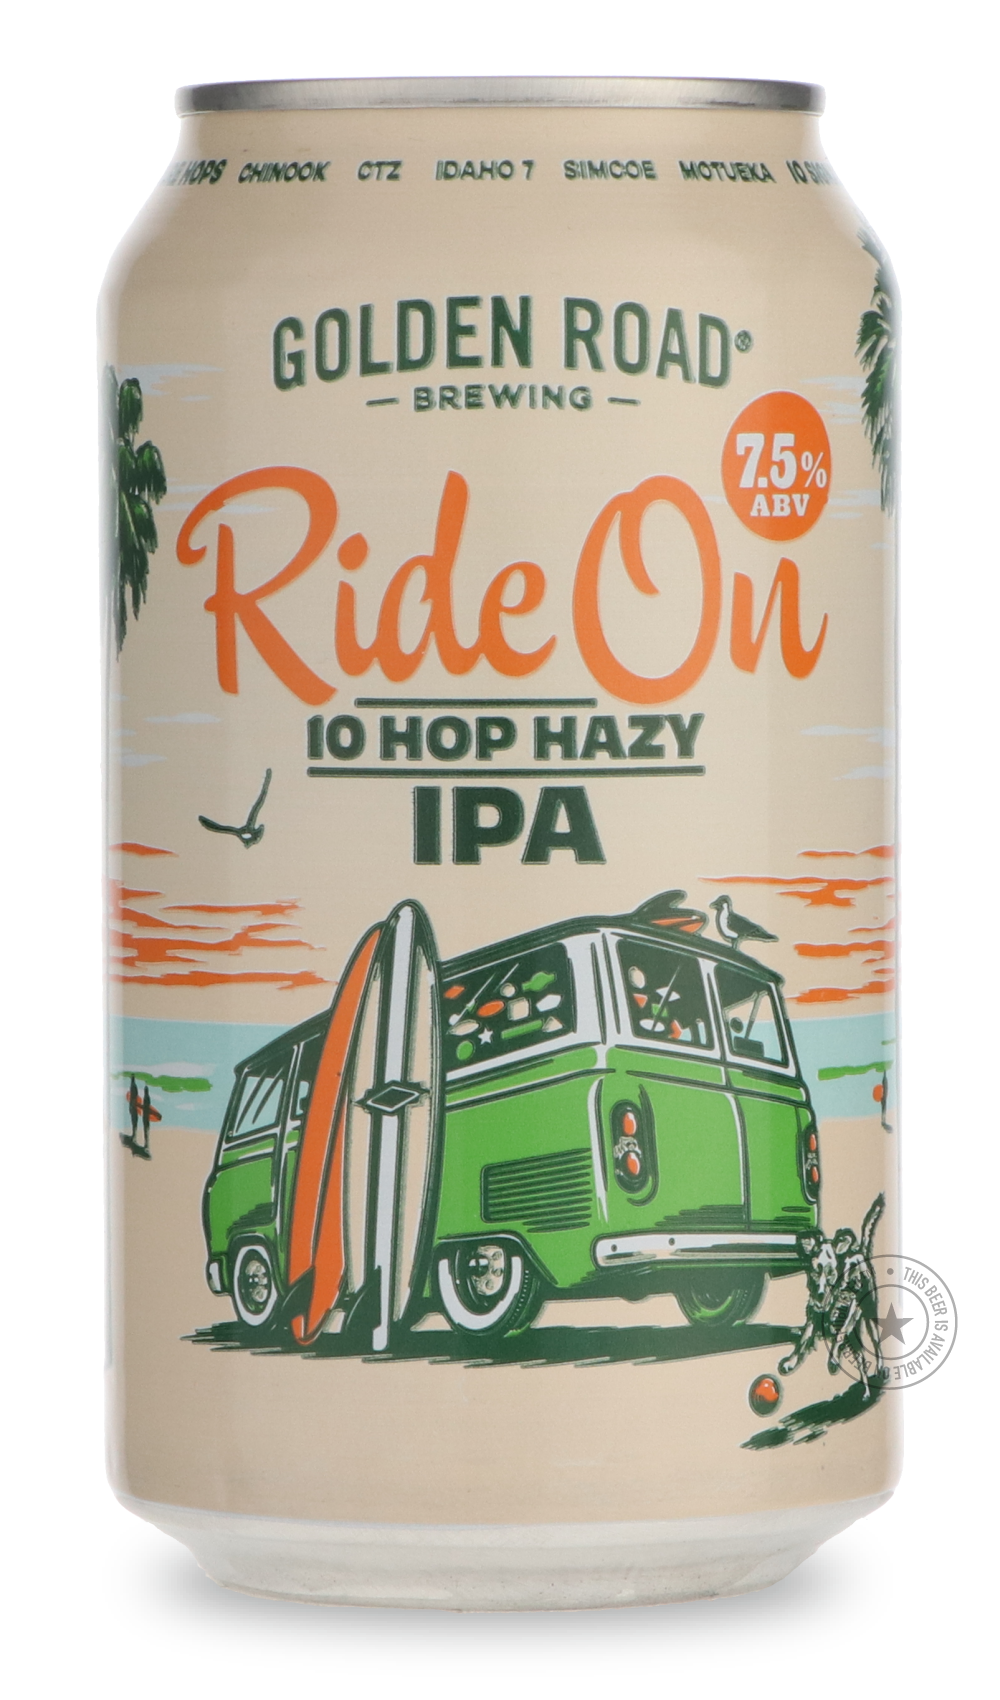 -Golden Road- Ride On 10 Hop Hazy IPA-IPA- Only @ Beer Republic - The best online beer store for American & Canadian craft beer - Buy beer online from the USA and Canada - Bier online kopen - Amerikaans bier kopen - Craft beer store - Craft beer kopen - Amerikanisch bier kaufen - Bier online kaufen - Acheter biere online - IPA - Stout - Porter - New England IPA - Hazy IPA - Imperial Stout - Barrel Aged - Barrel Aged Imperial Stout - Brown - Dark beer - Blond - Blonde - Pilsner - Lager - Wheat - Weizen - Amb